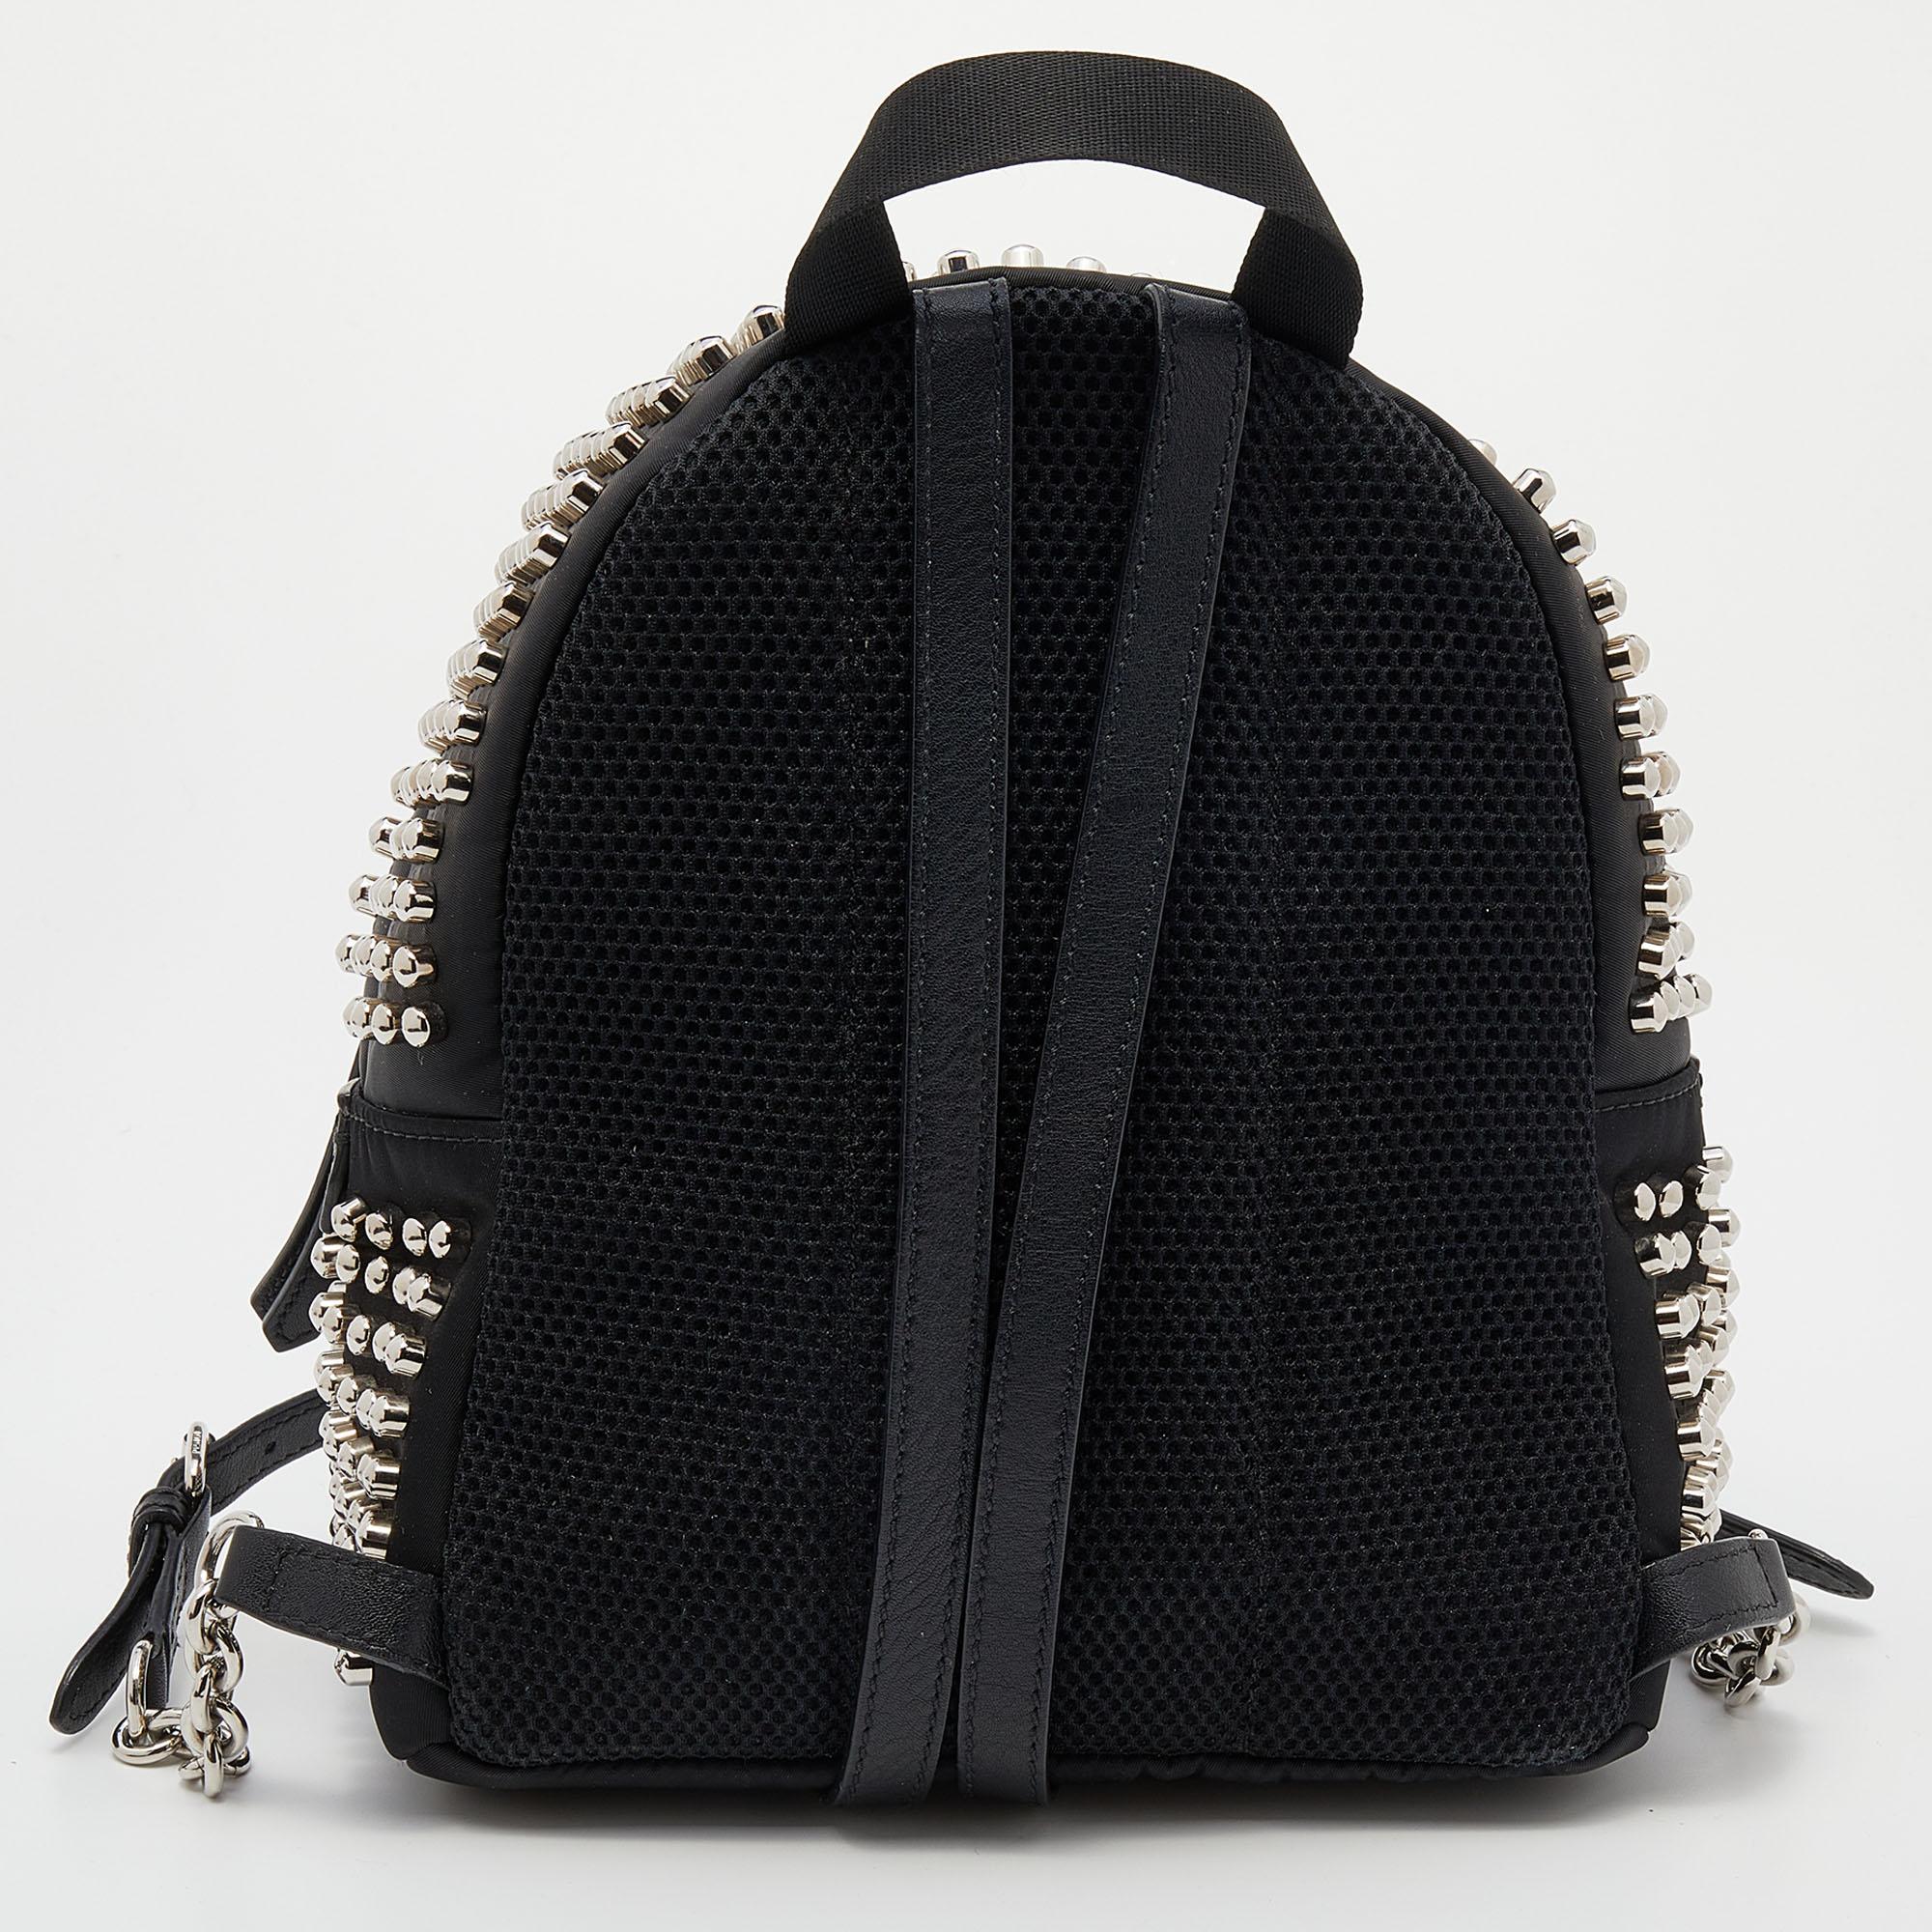 Fendi provides a fun alternative to your everyday bag. It is made of black nylon and leather. The backpack has zip compartments and stud details for a chic look.

